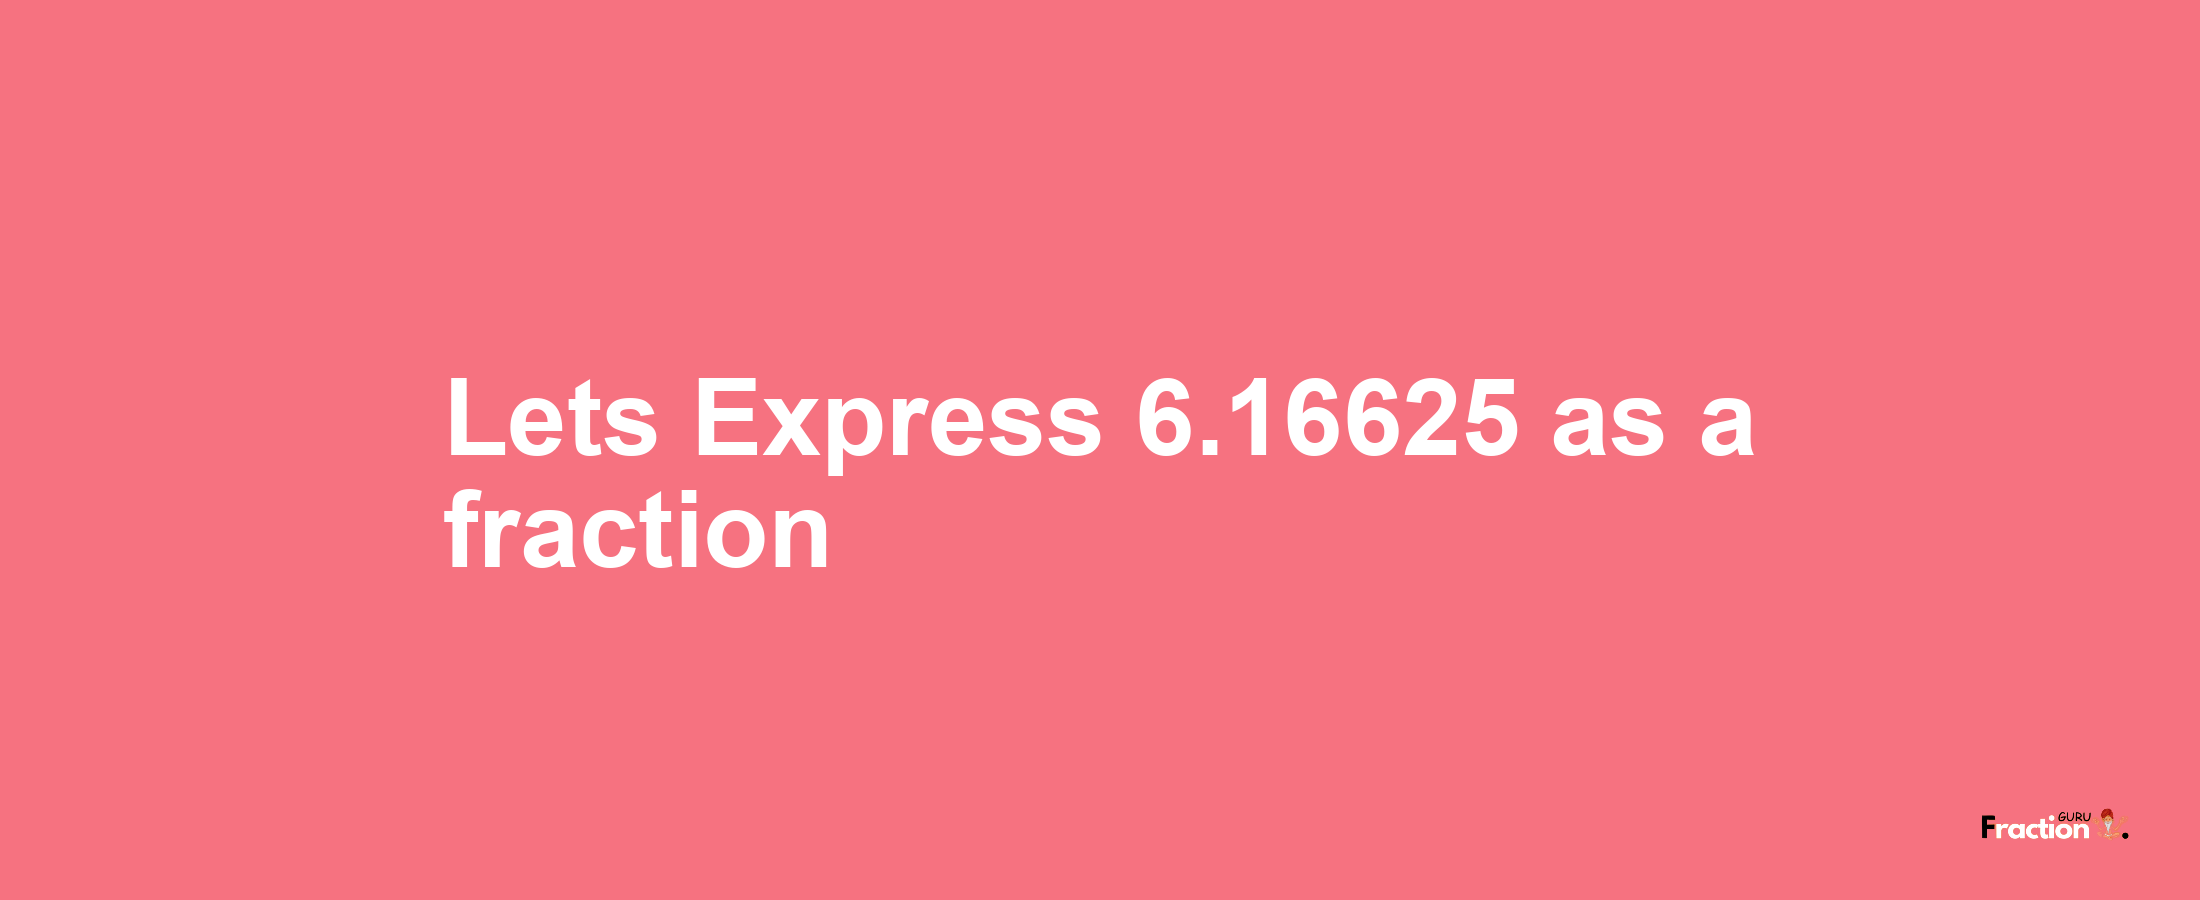 Lets Express 6.16625 as afraction